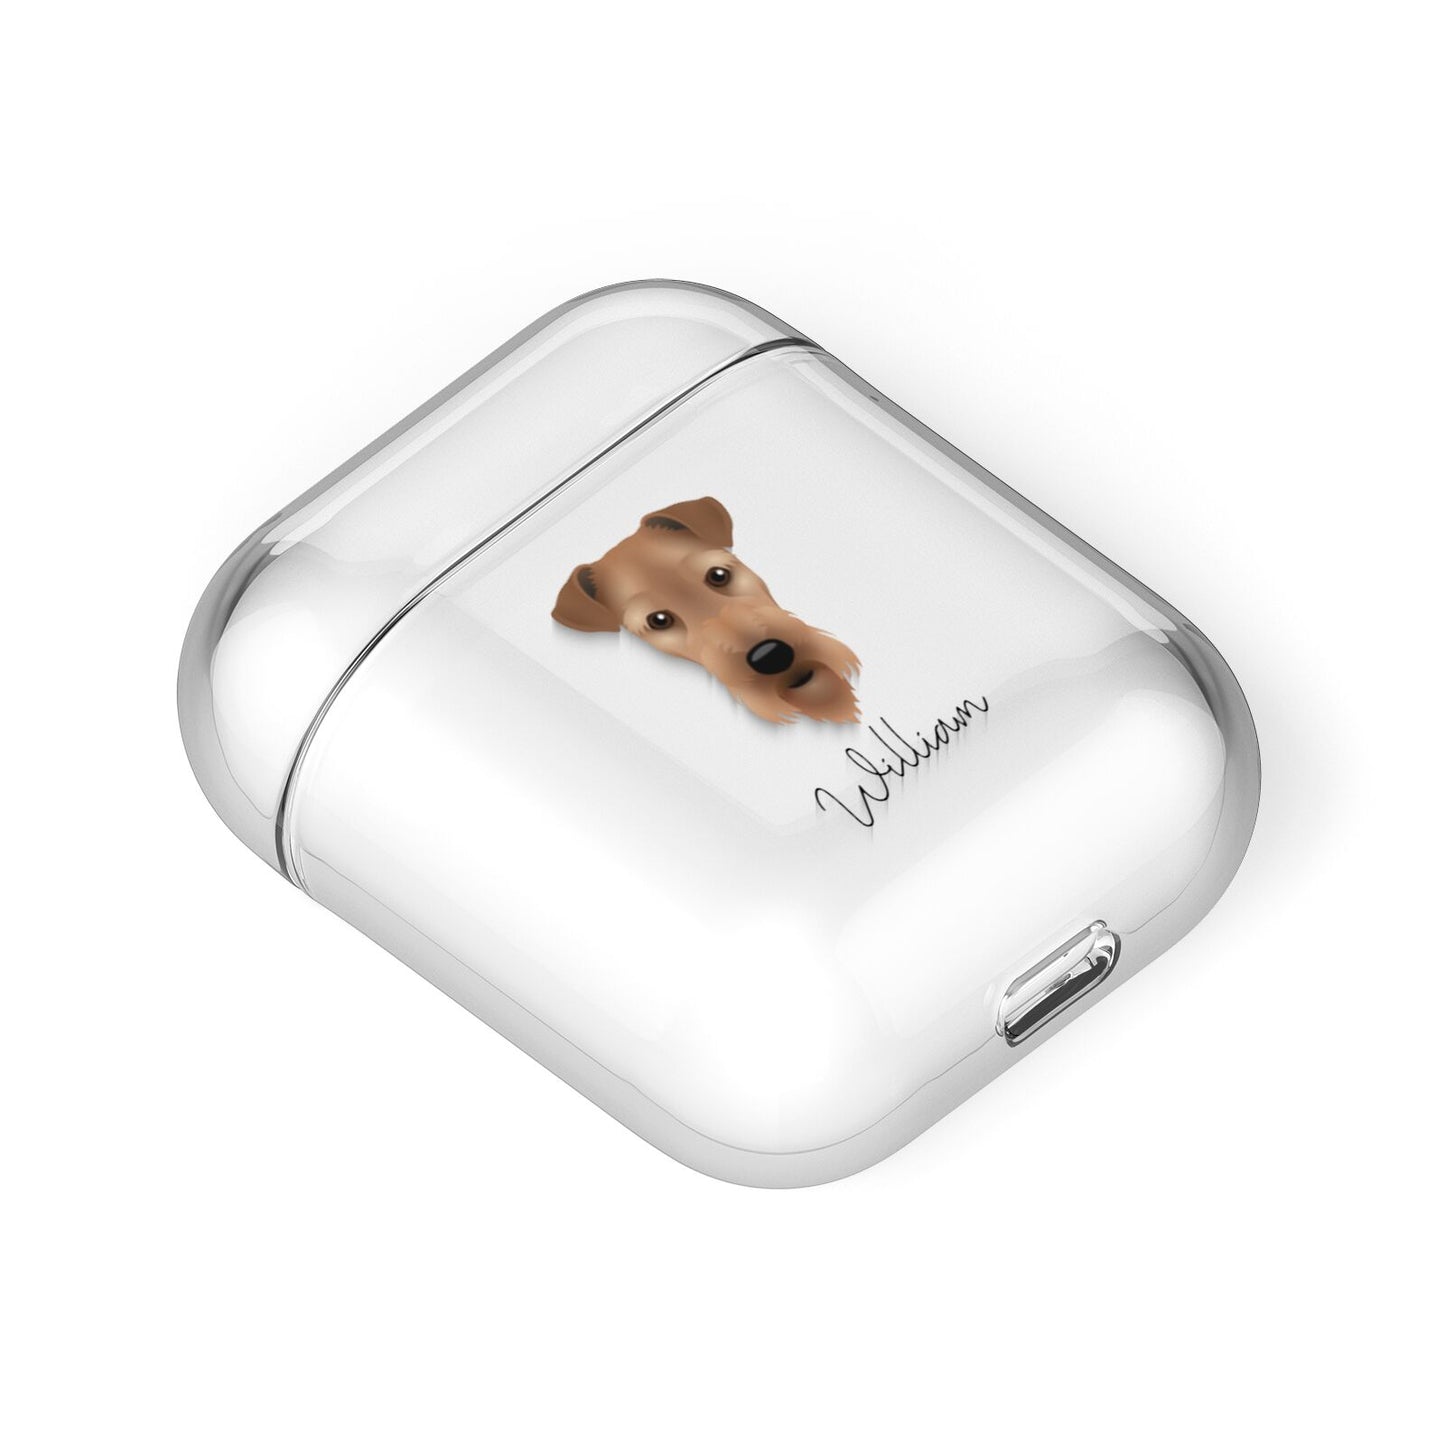 Airedale Terrier Personalised AirPods Case Laid Flat